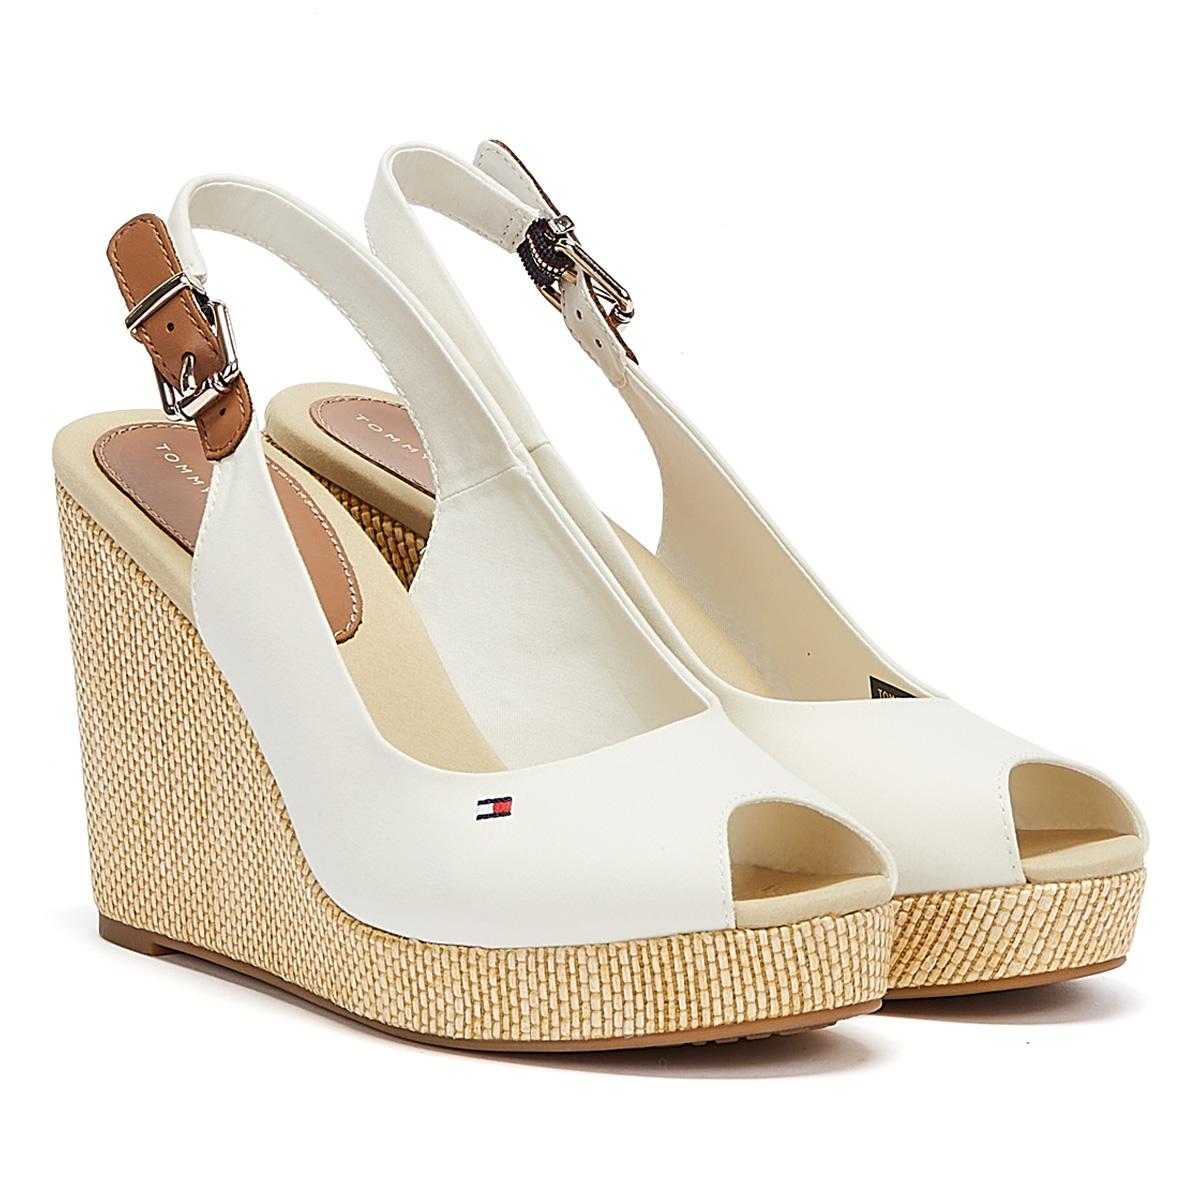 Tommy Hilfiger Canvas Iconic Elena Sling Back Wedge Sandals in White | Lyst